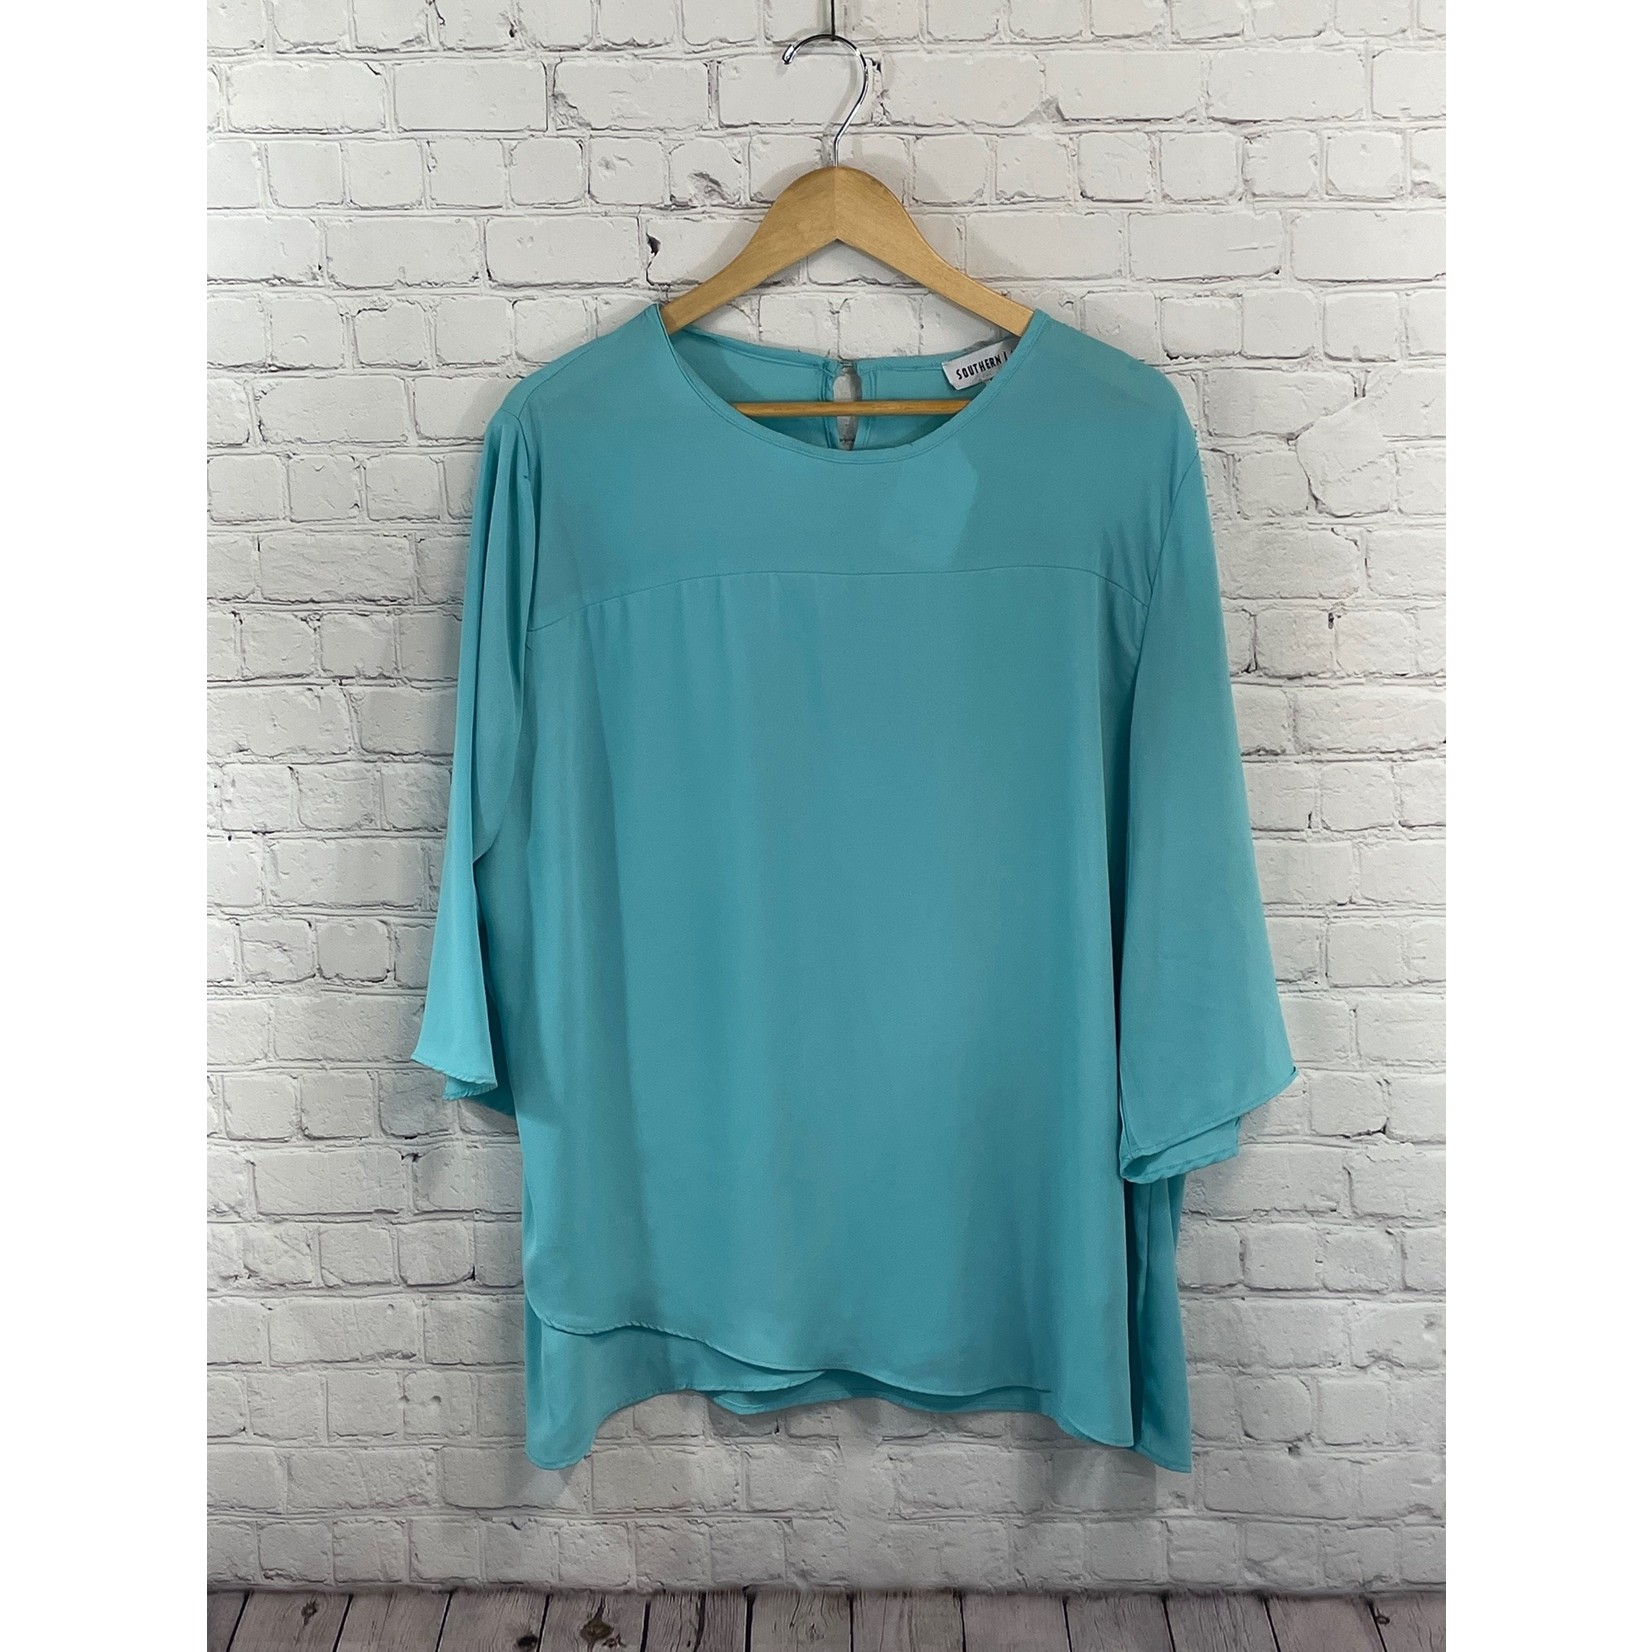 Southers Lady Southern Lady, Turquoise, 3/4 Sleeve, XL